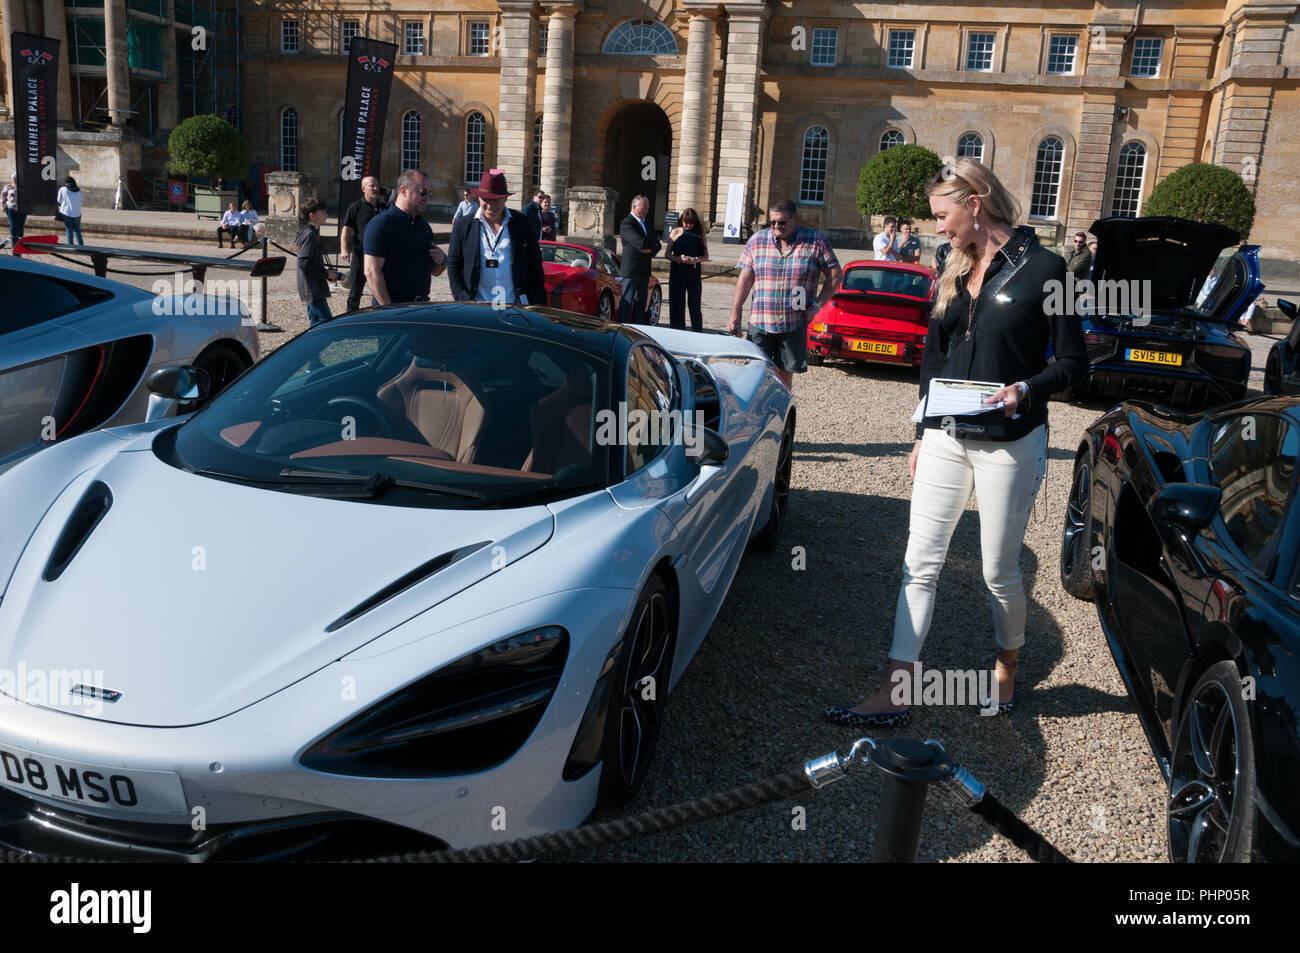 Woodstock, Oxfordshire, UK. 02nd Sep, 2018. Jodie Kidd in attendance at the Salon Prive Concours, Blenheim Palace Classic and Supercar event, Woodstock, Oxfordshire, 2nd Sep 2018 Credit: Stanislav Halcin/Alamy Live News Stock Photo